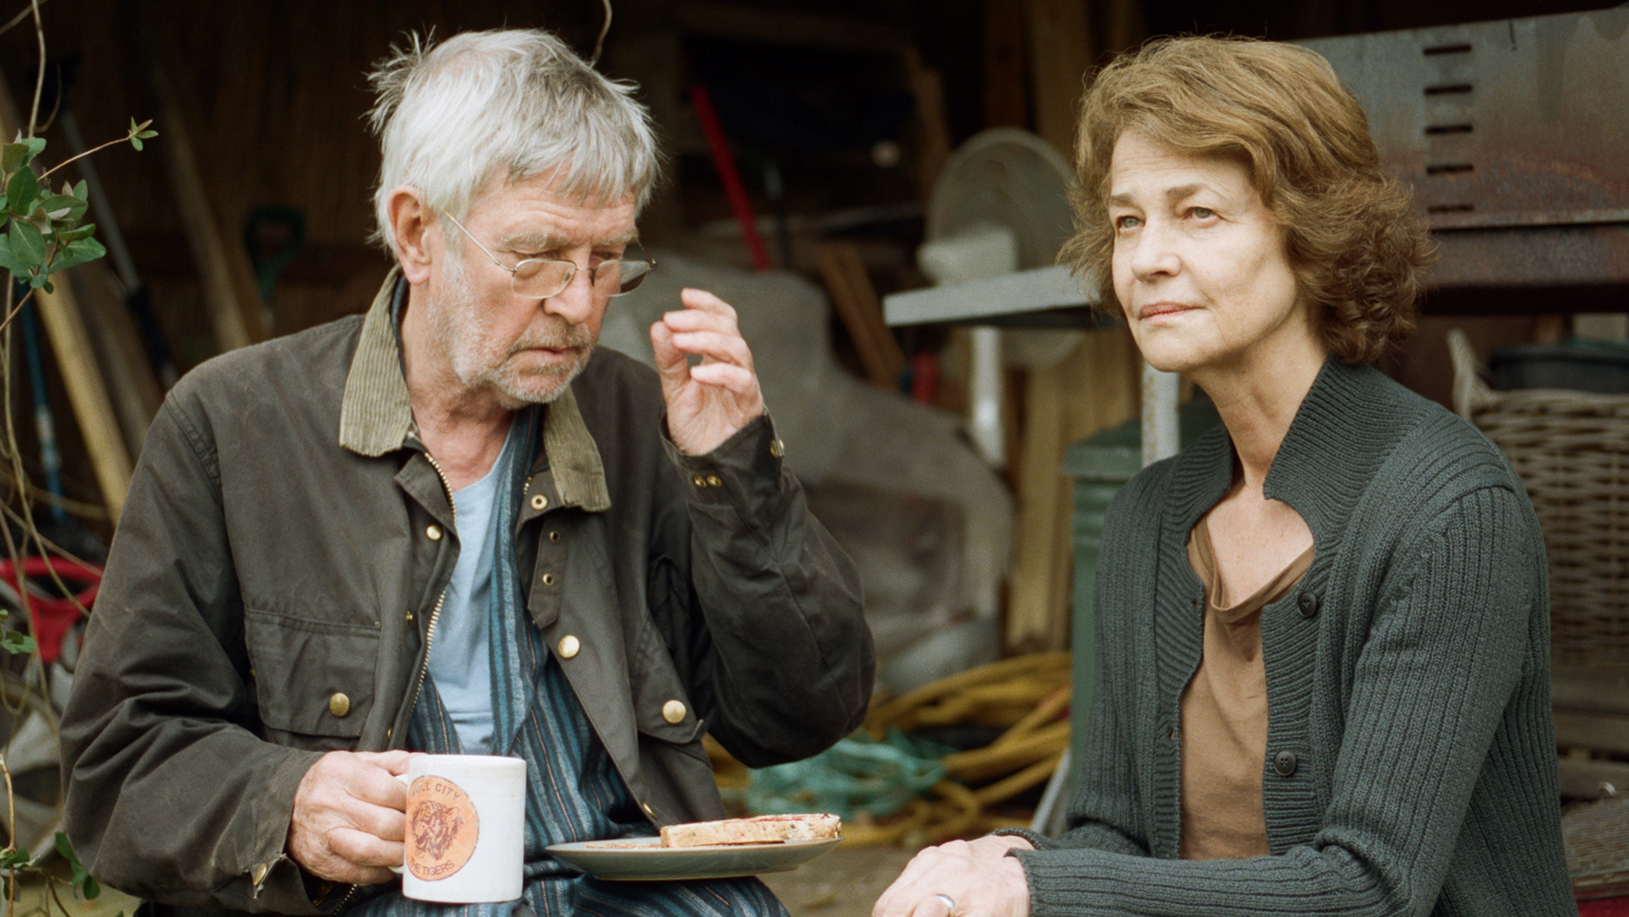 Tom Courtenay and Charlotte Rampling in <i>45 Years</i>. (Artificial Eye)